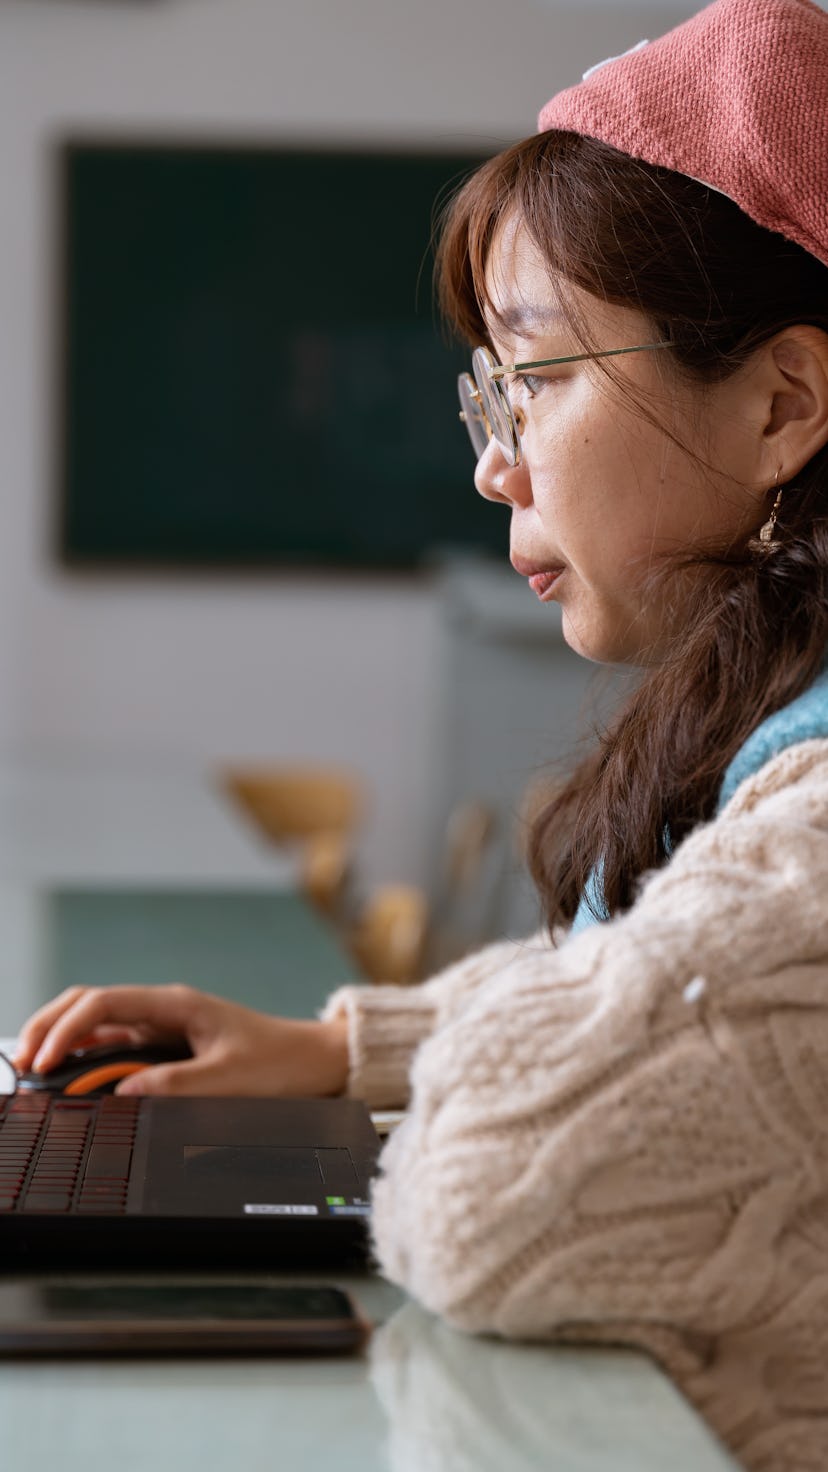 A close-up of a woman using a computer. During Saturn retrograde, focus on achieving your goals.